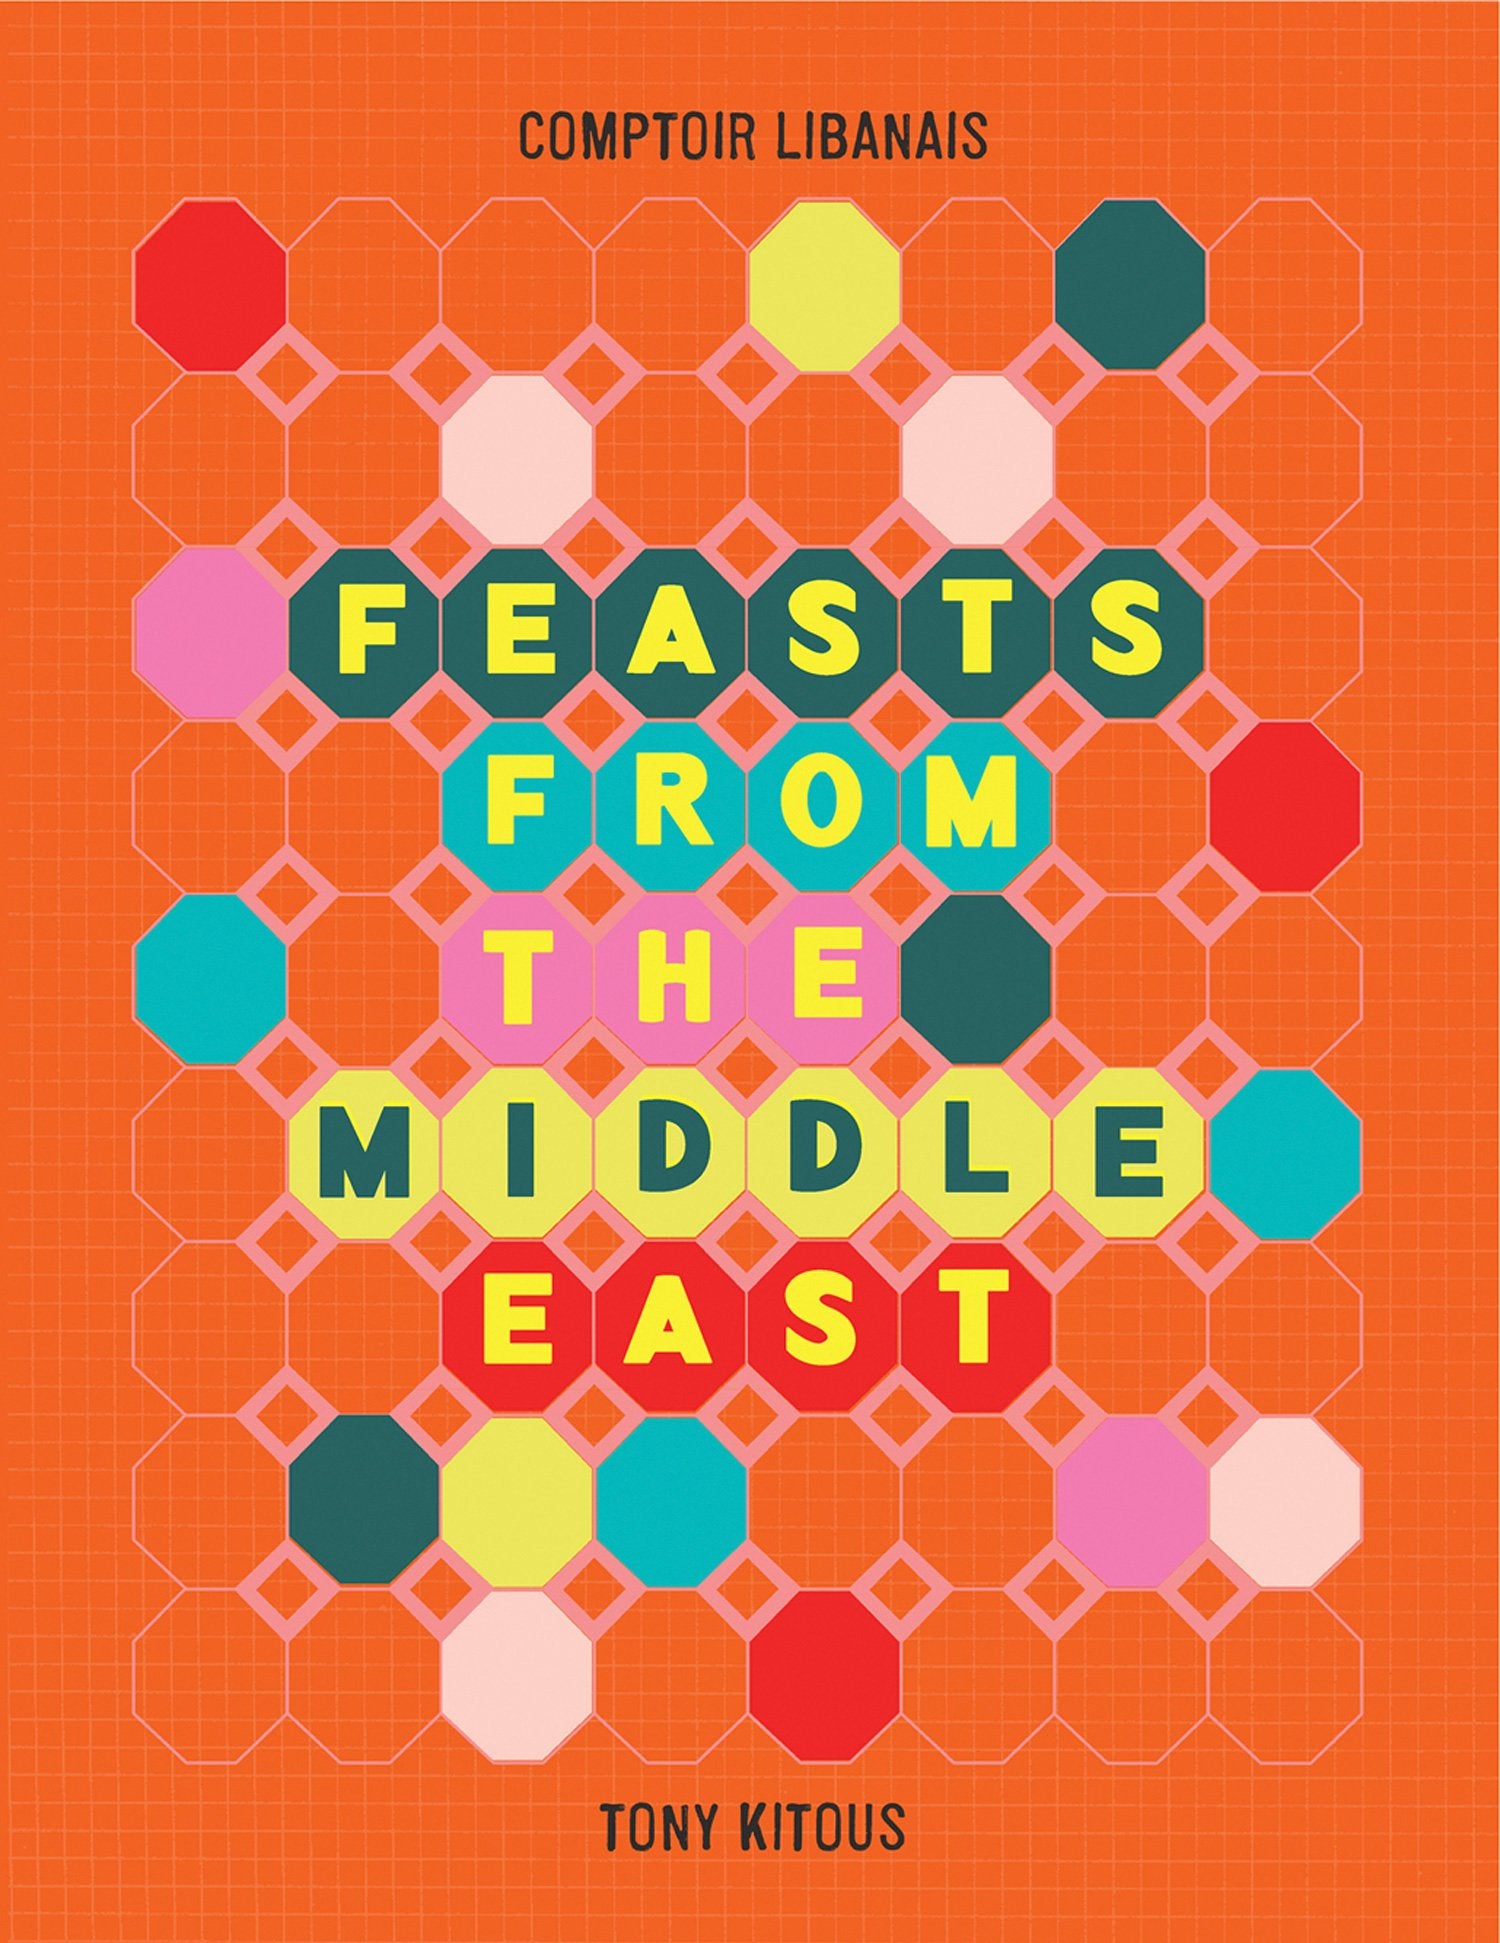 Feasts from The Middle East (Tony Kitous)